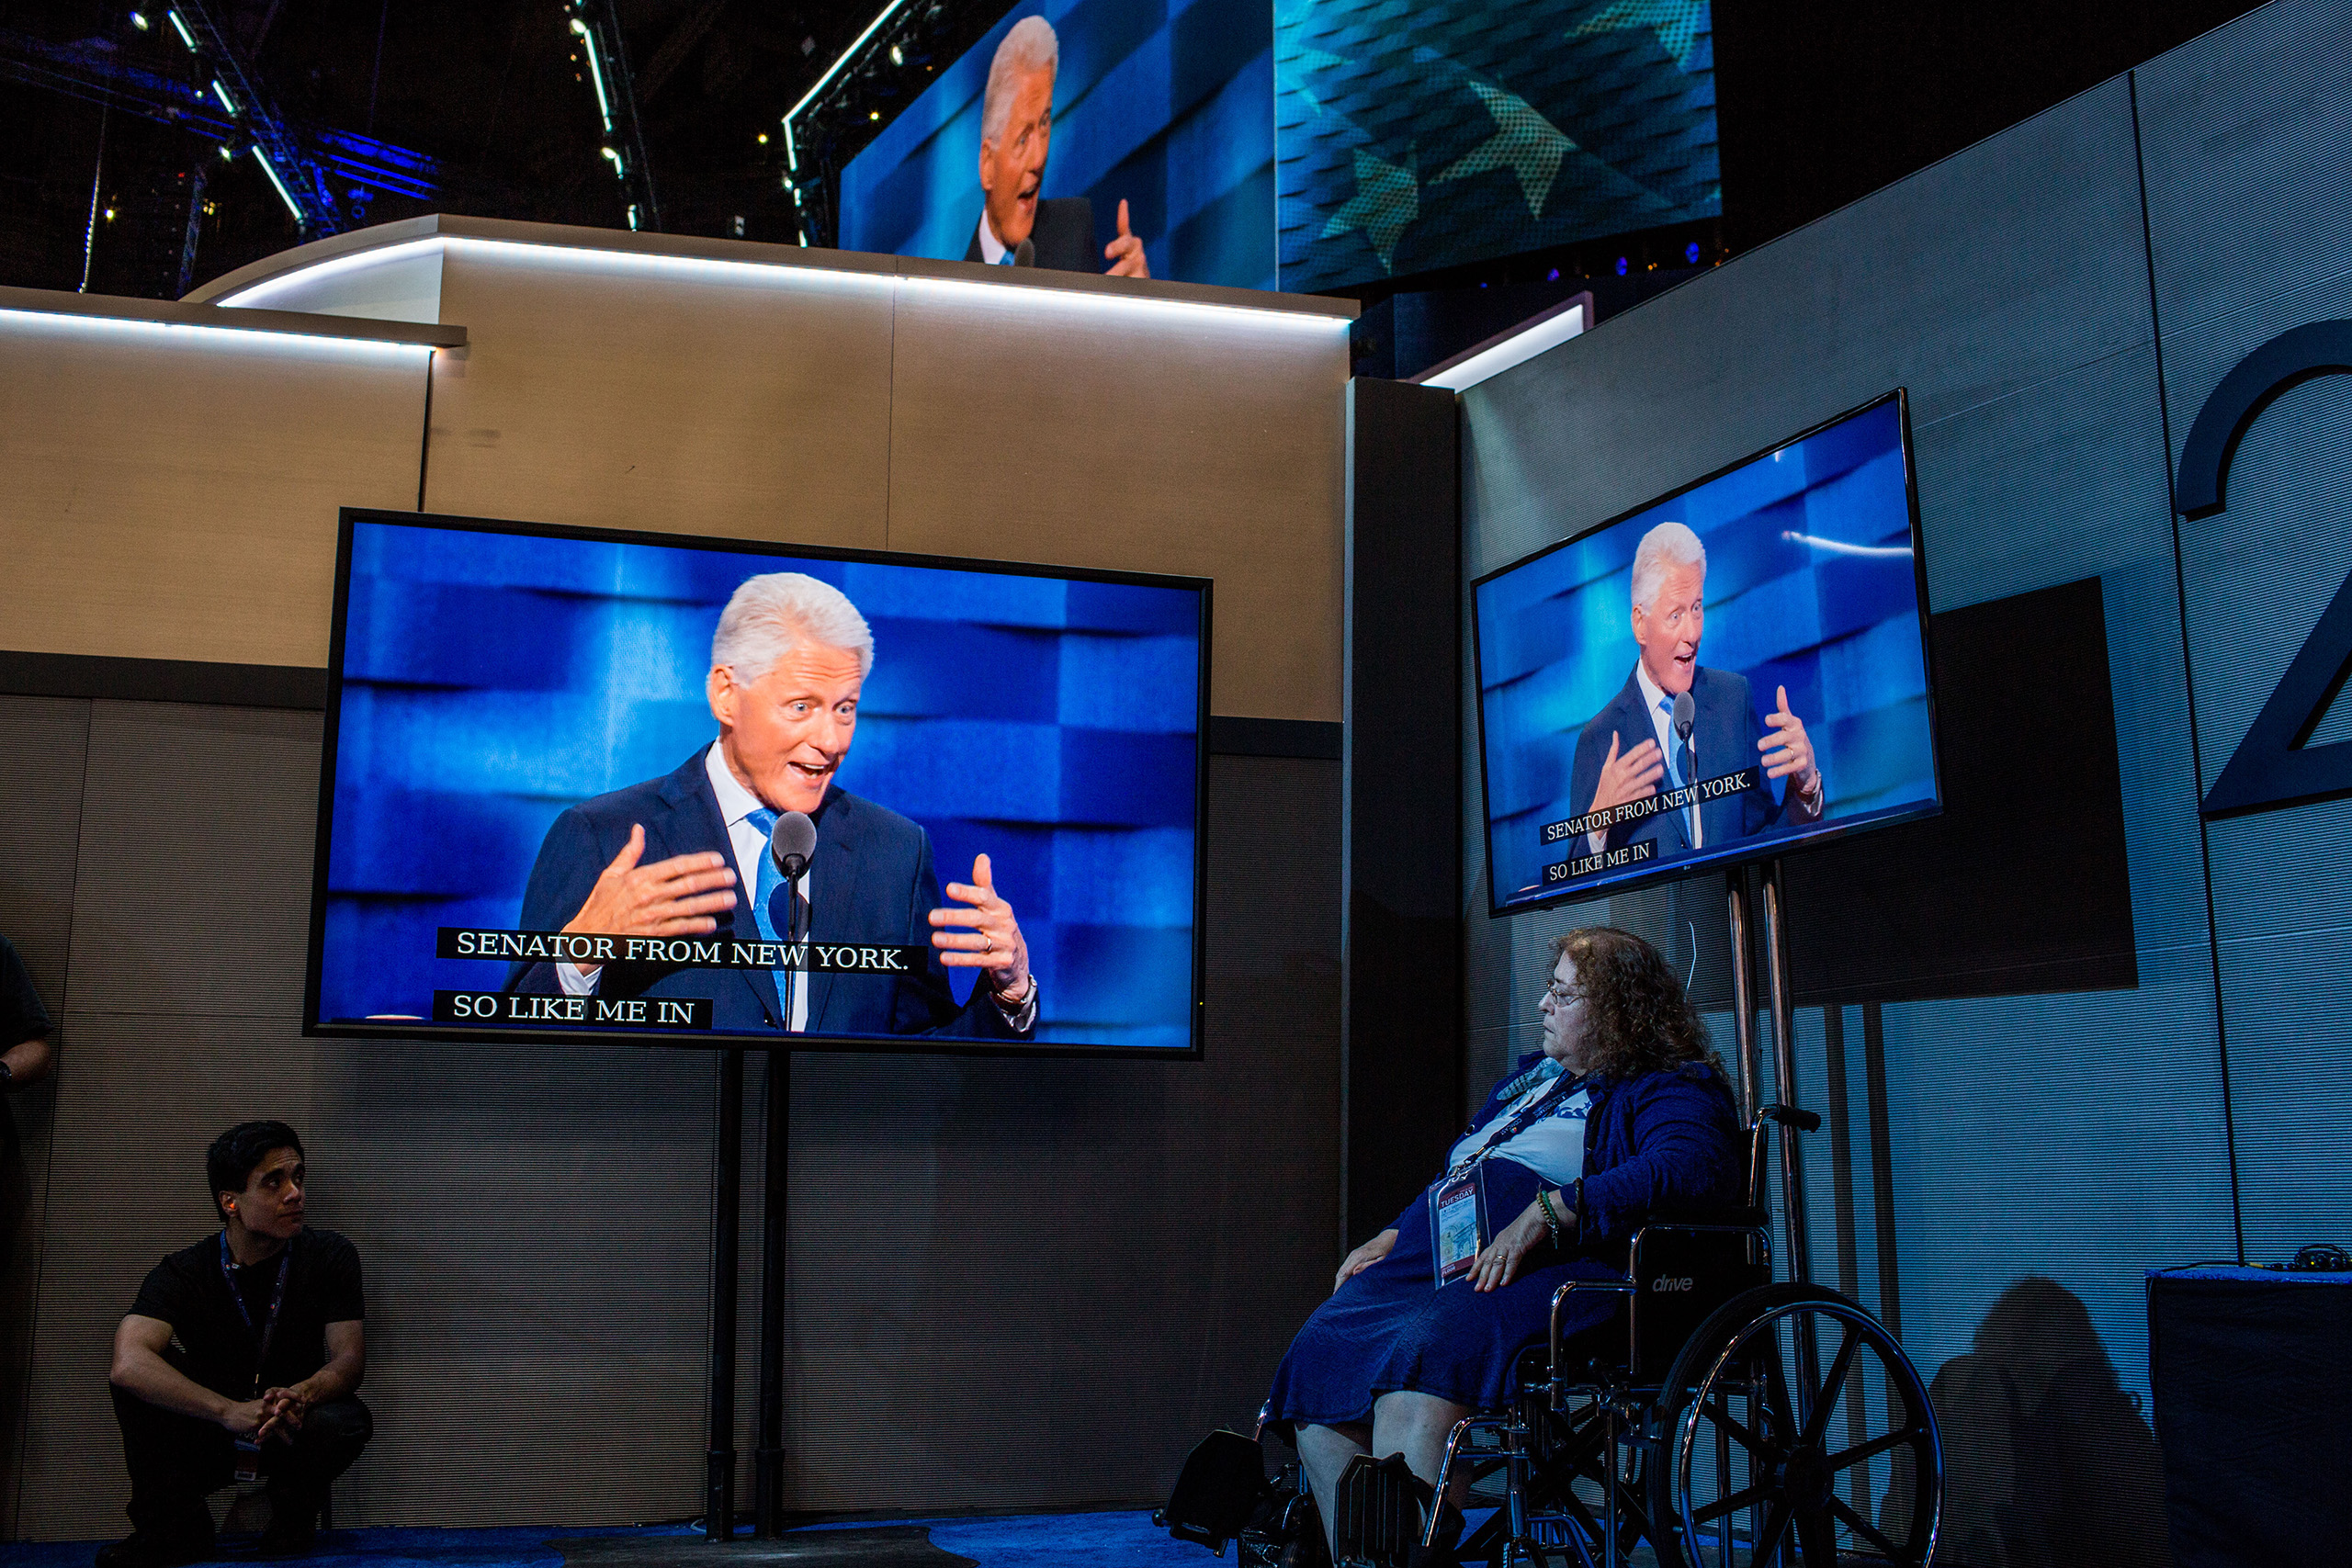 Bill Clinton speaks at the Democratic National Convention at the Wells Fargo Center in Philadelphia, Pennsylvania, on July 26, 2016.